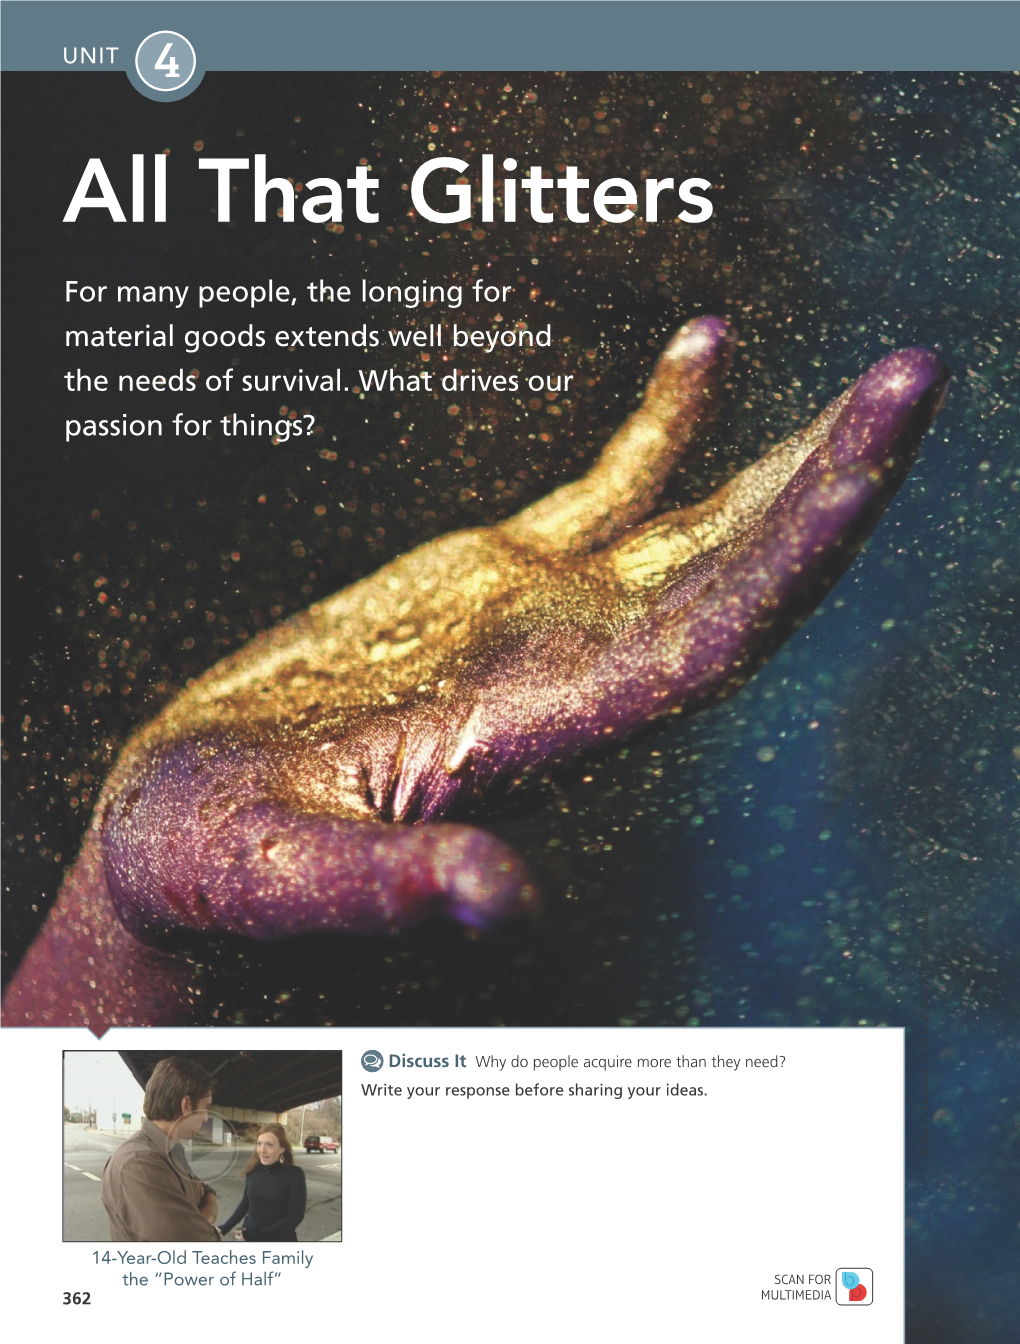 All That Glitters MULTIMEDIA ESSENTIAL QUESTION: What Do Our Possessions Reveal About Us?